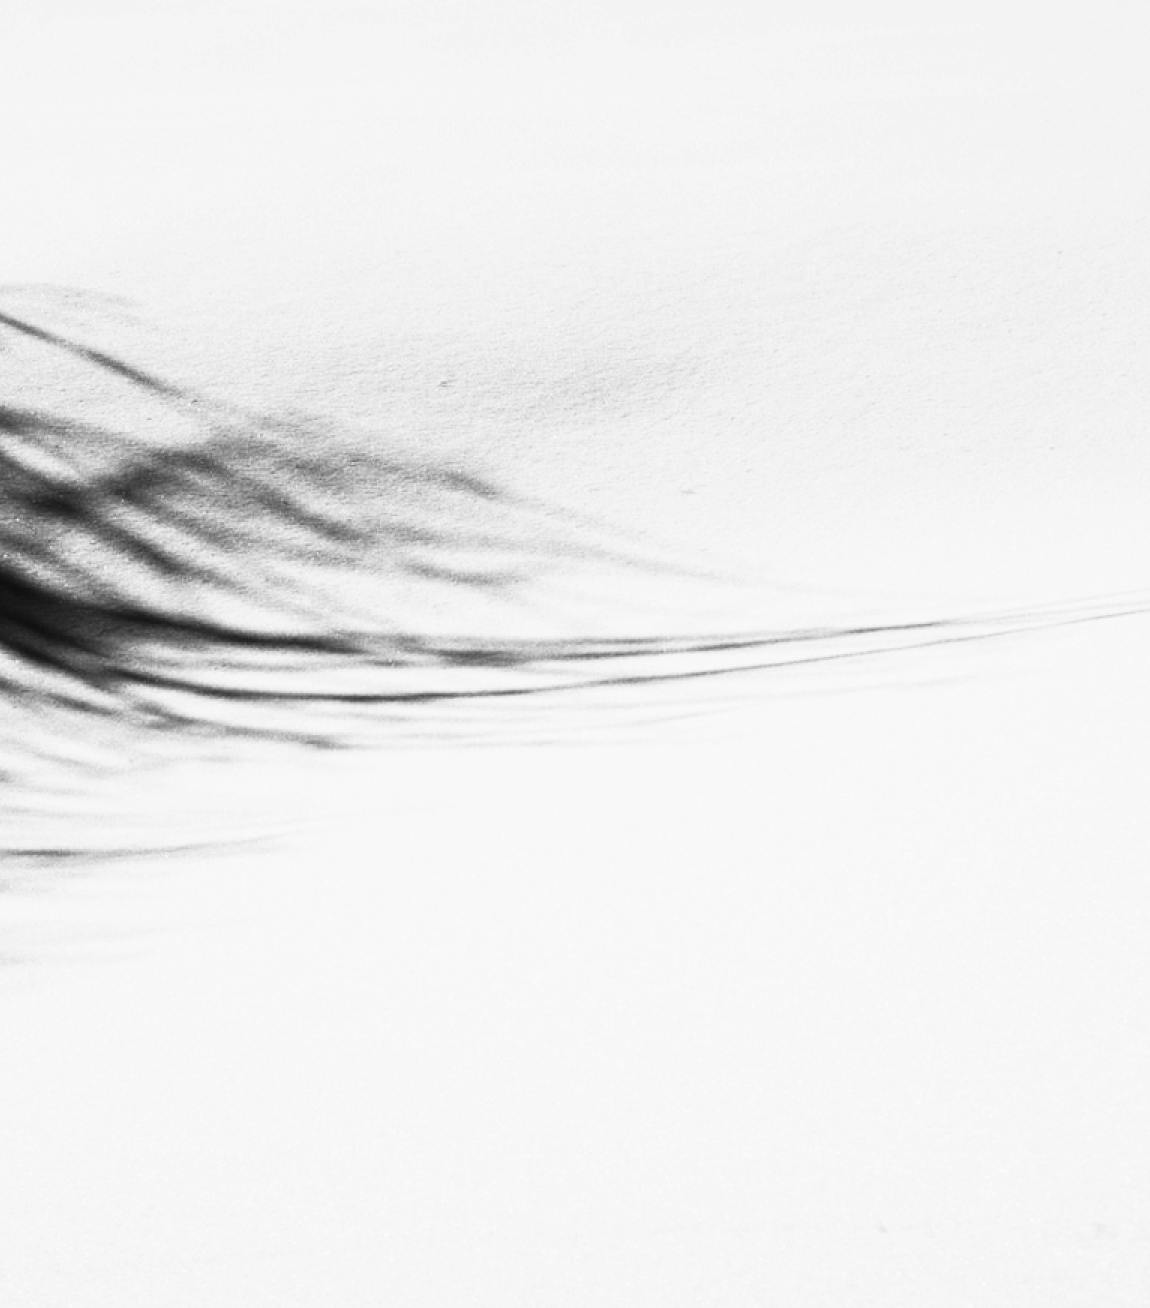 A black and white image of abstract shadows on a white surface